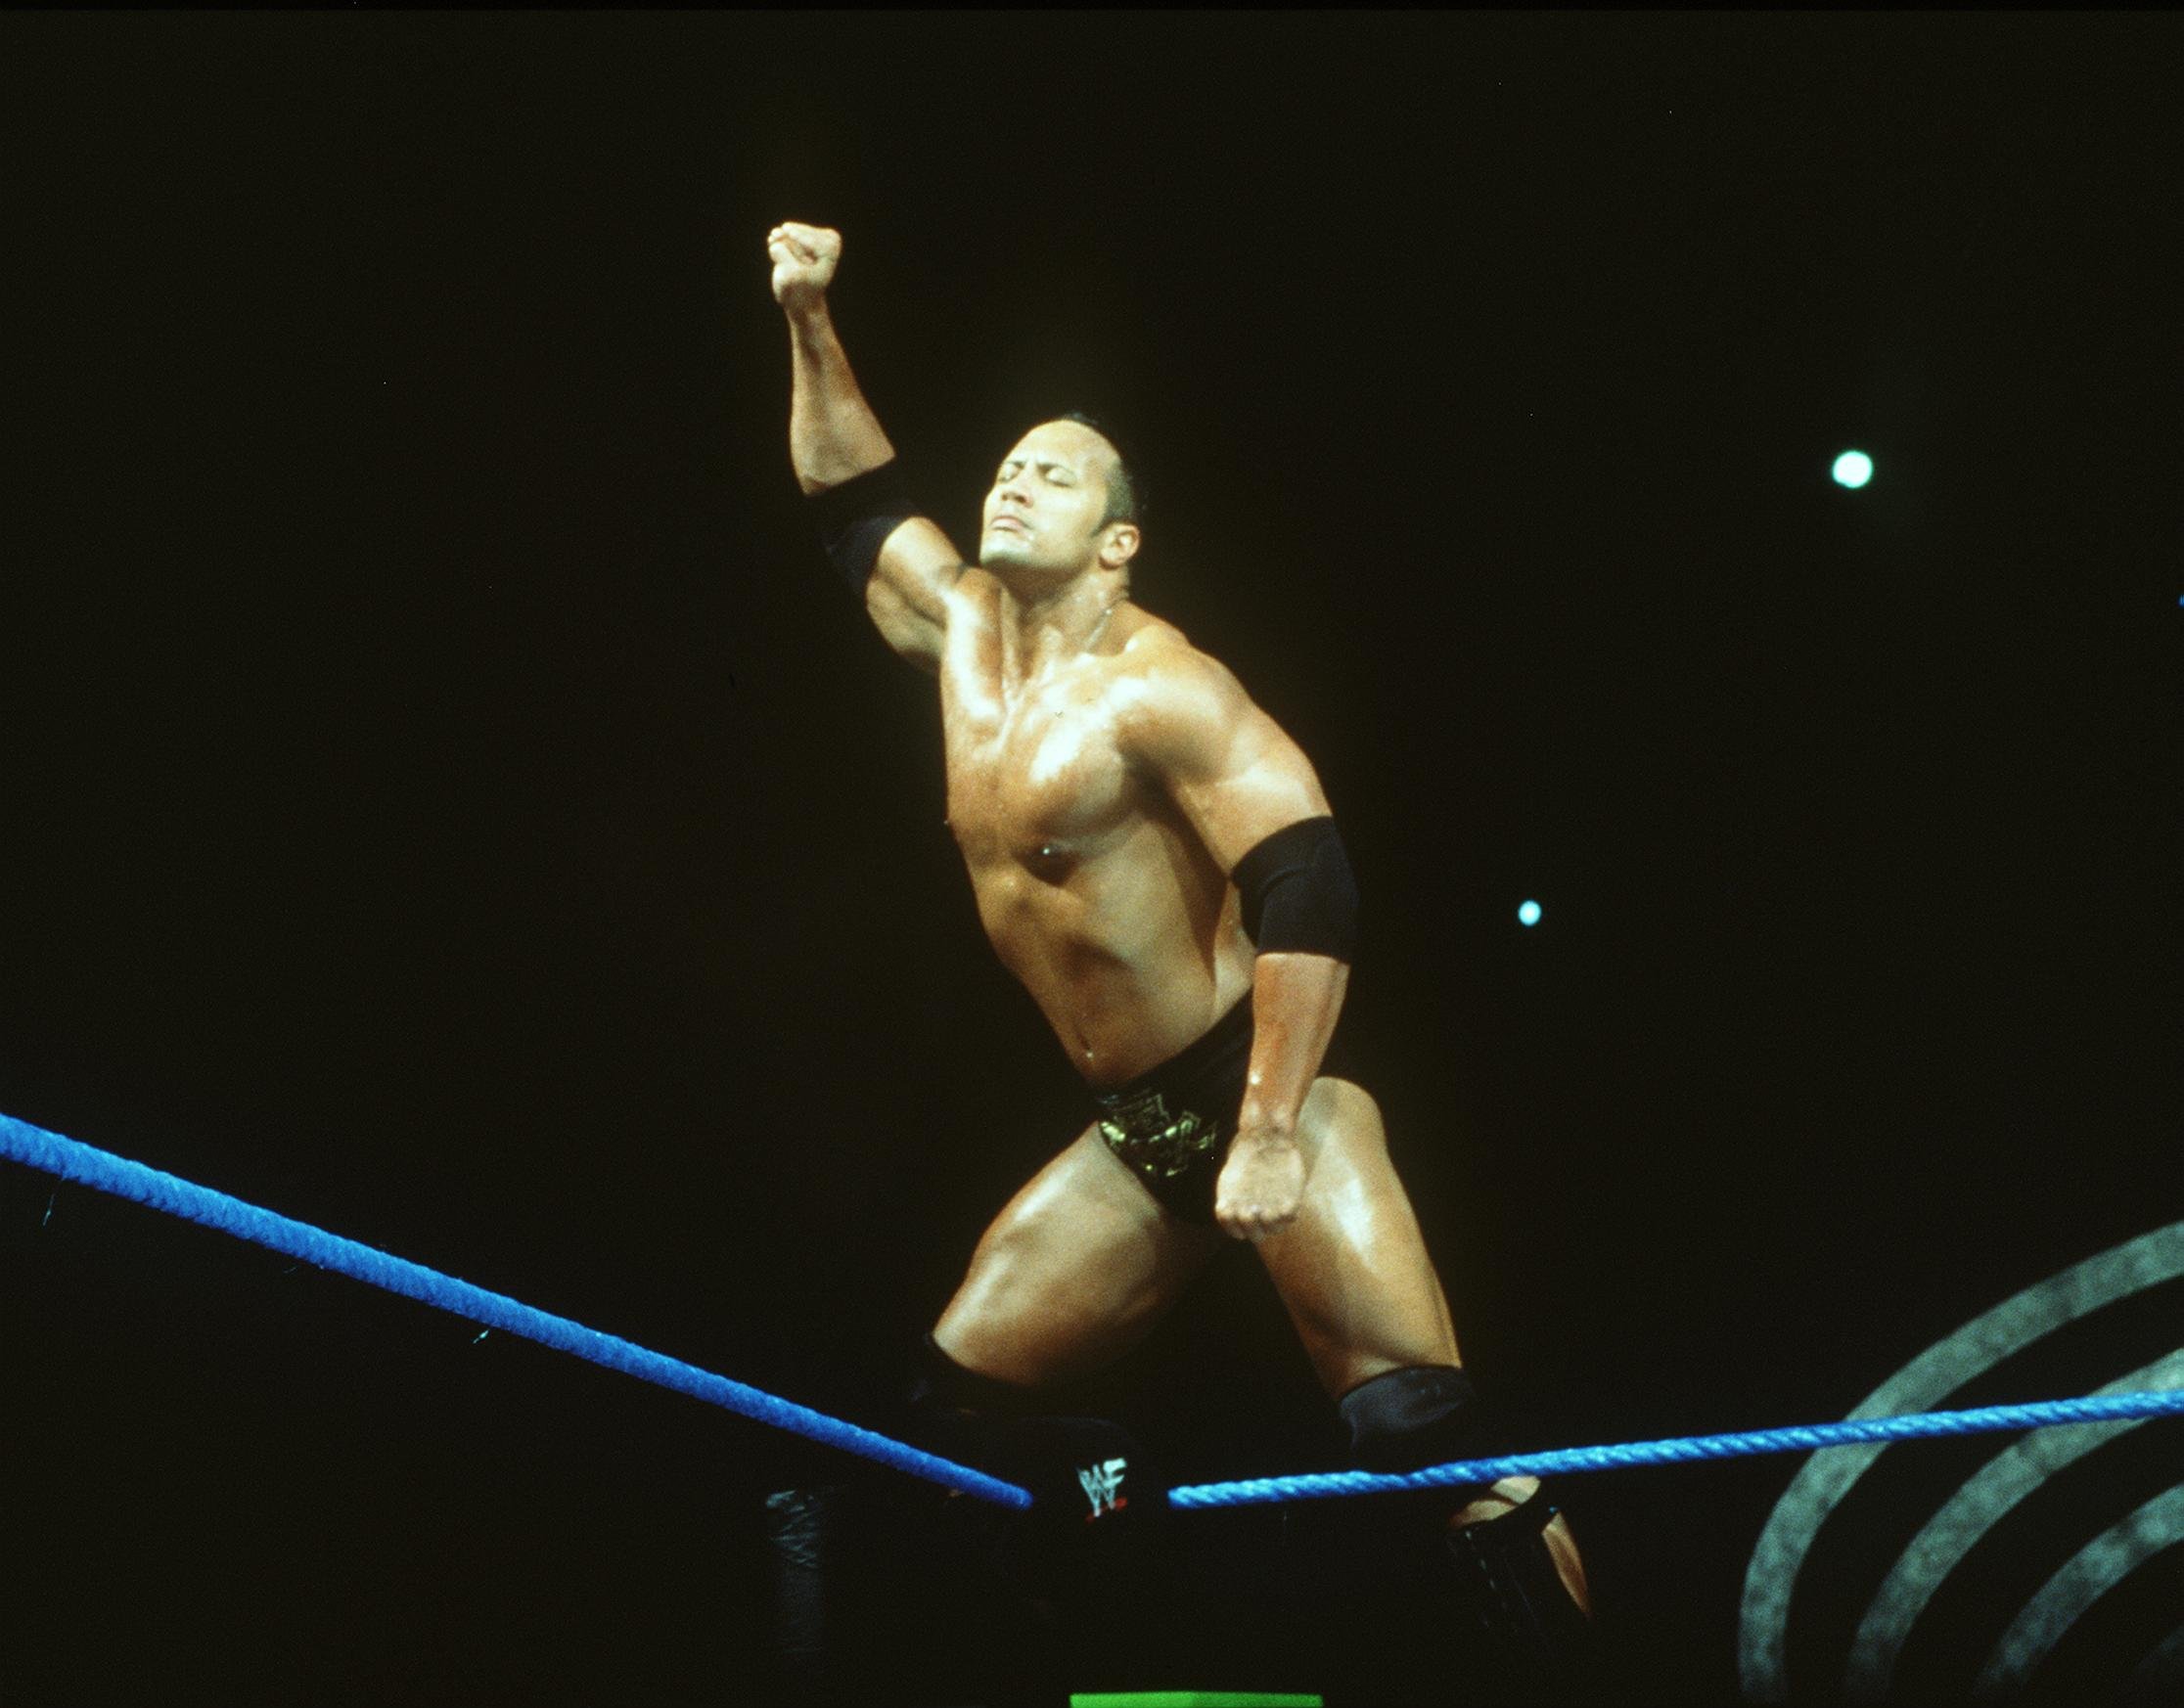 World Wrestling Federation's wrestler The Rock poses on June 12, 2000 In Los Angeles, California ┃Source: Getty Images